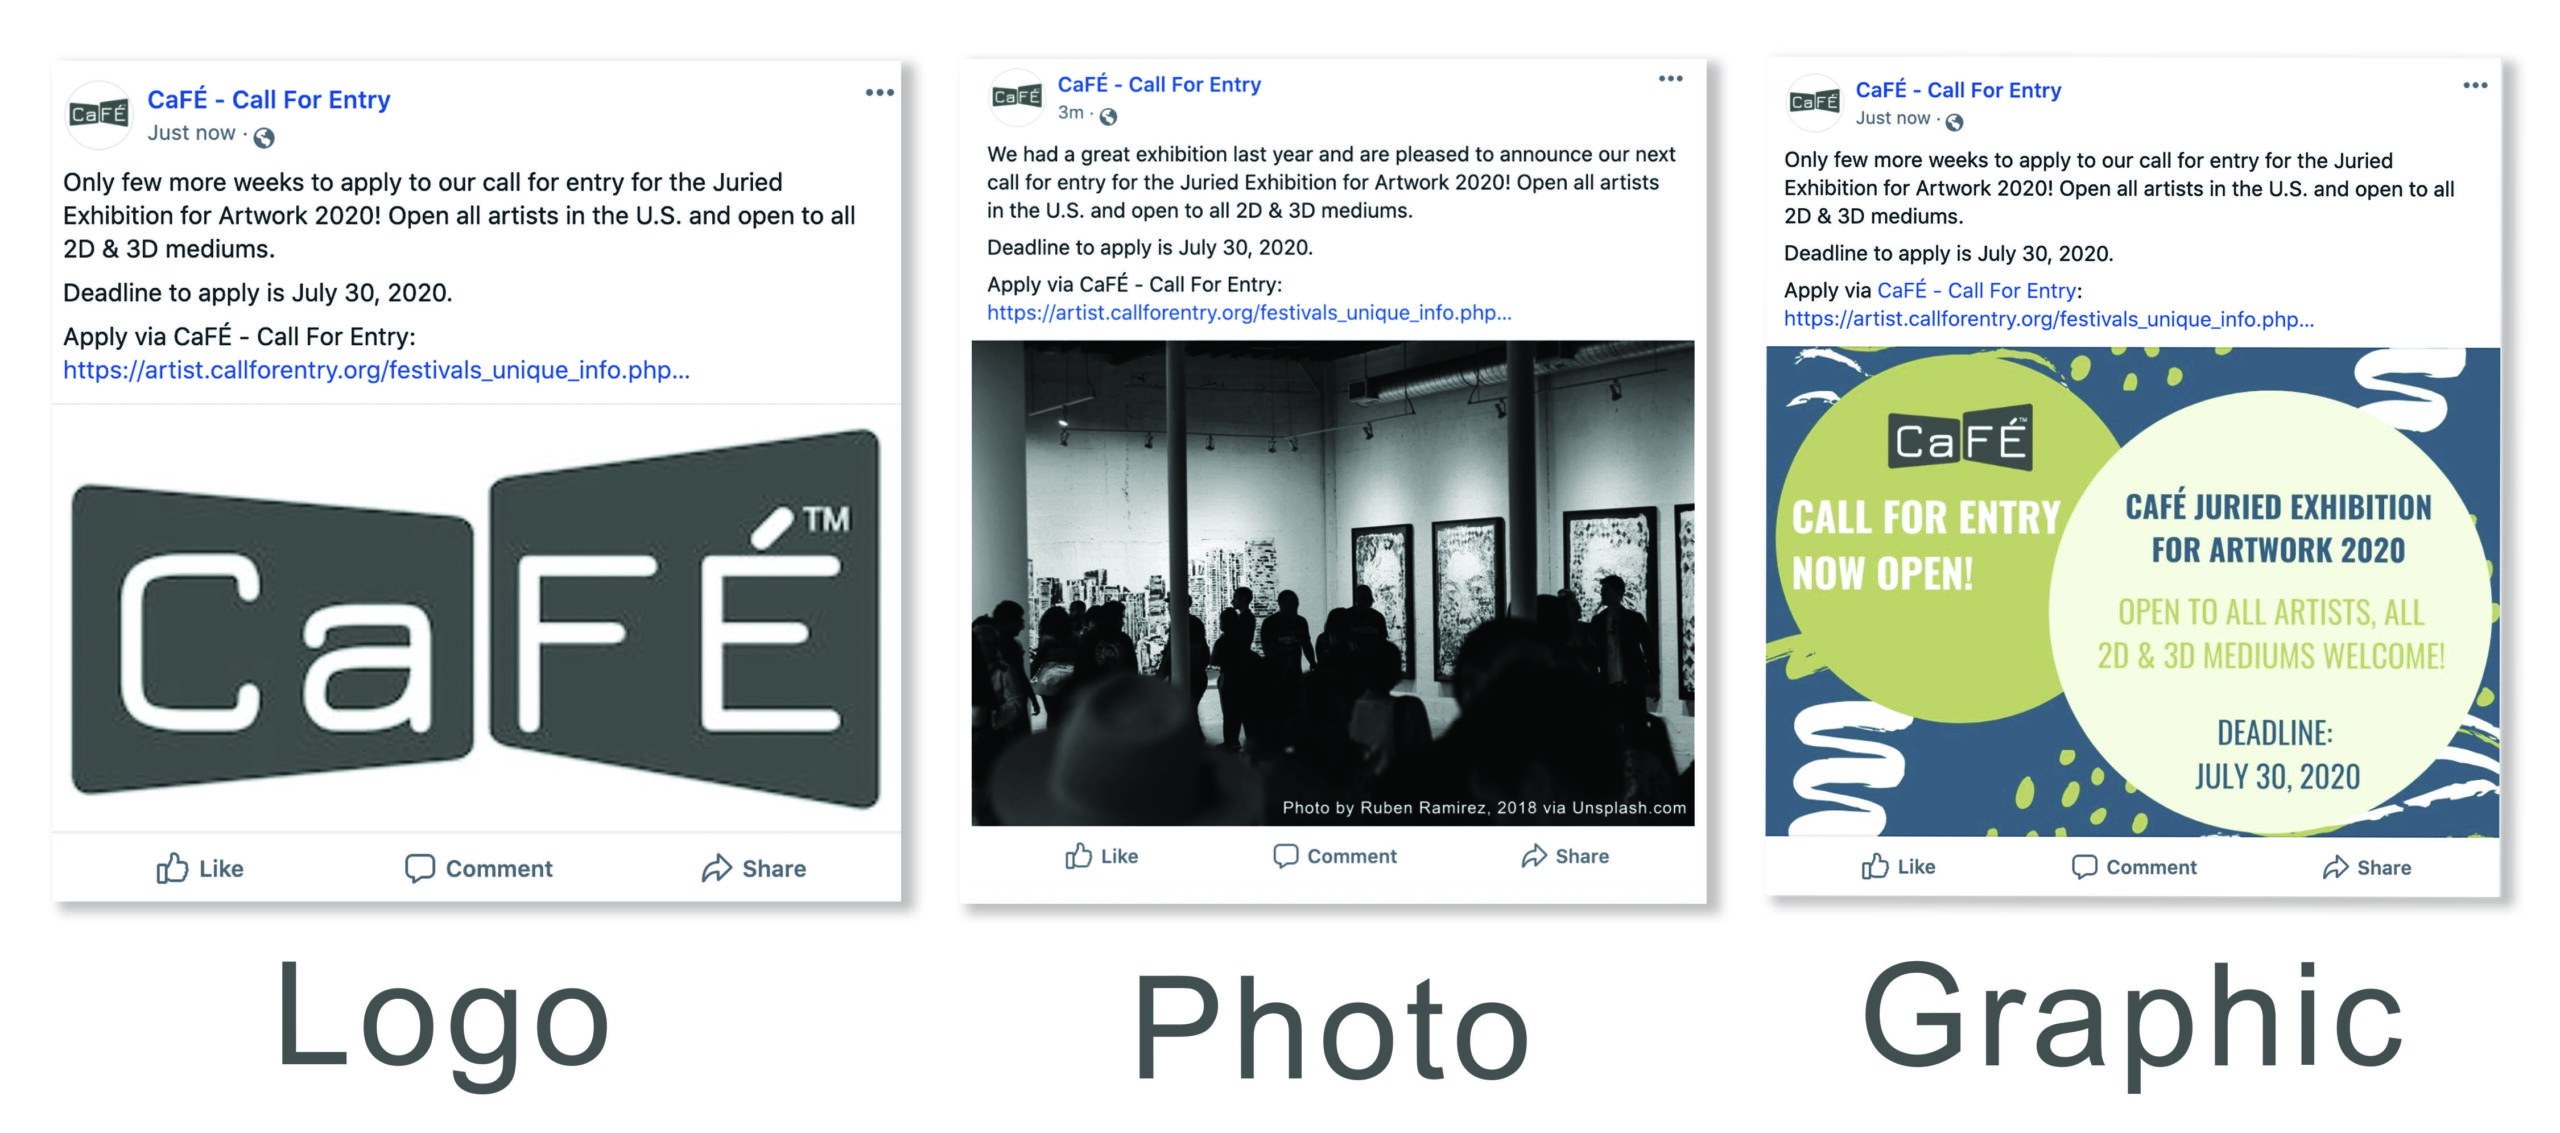 Examples of visual graphics to include on social media including a logo on the far left side, photo from the exhibition in the middle and a speciality graphic on the right-hand side.